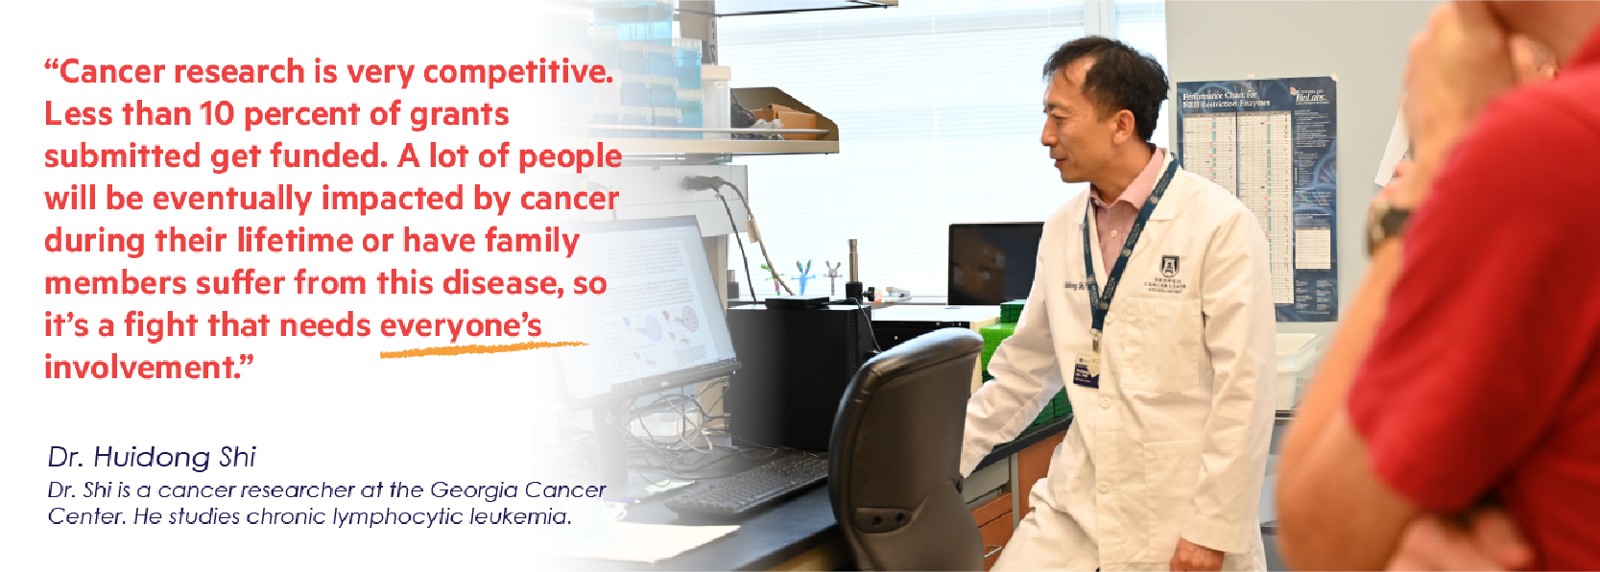 "Cancer research is very competitive. Less than 10 percent of grants submitted get funded. A lot of people will be eventually impacted by cancer during their lifetime or have family members suffer from this disease, so it's a fight that needs everyone's involvement." A quote from Dr. Huidong Shi, pictured in his lab.